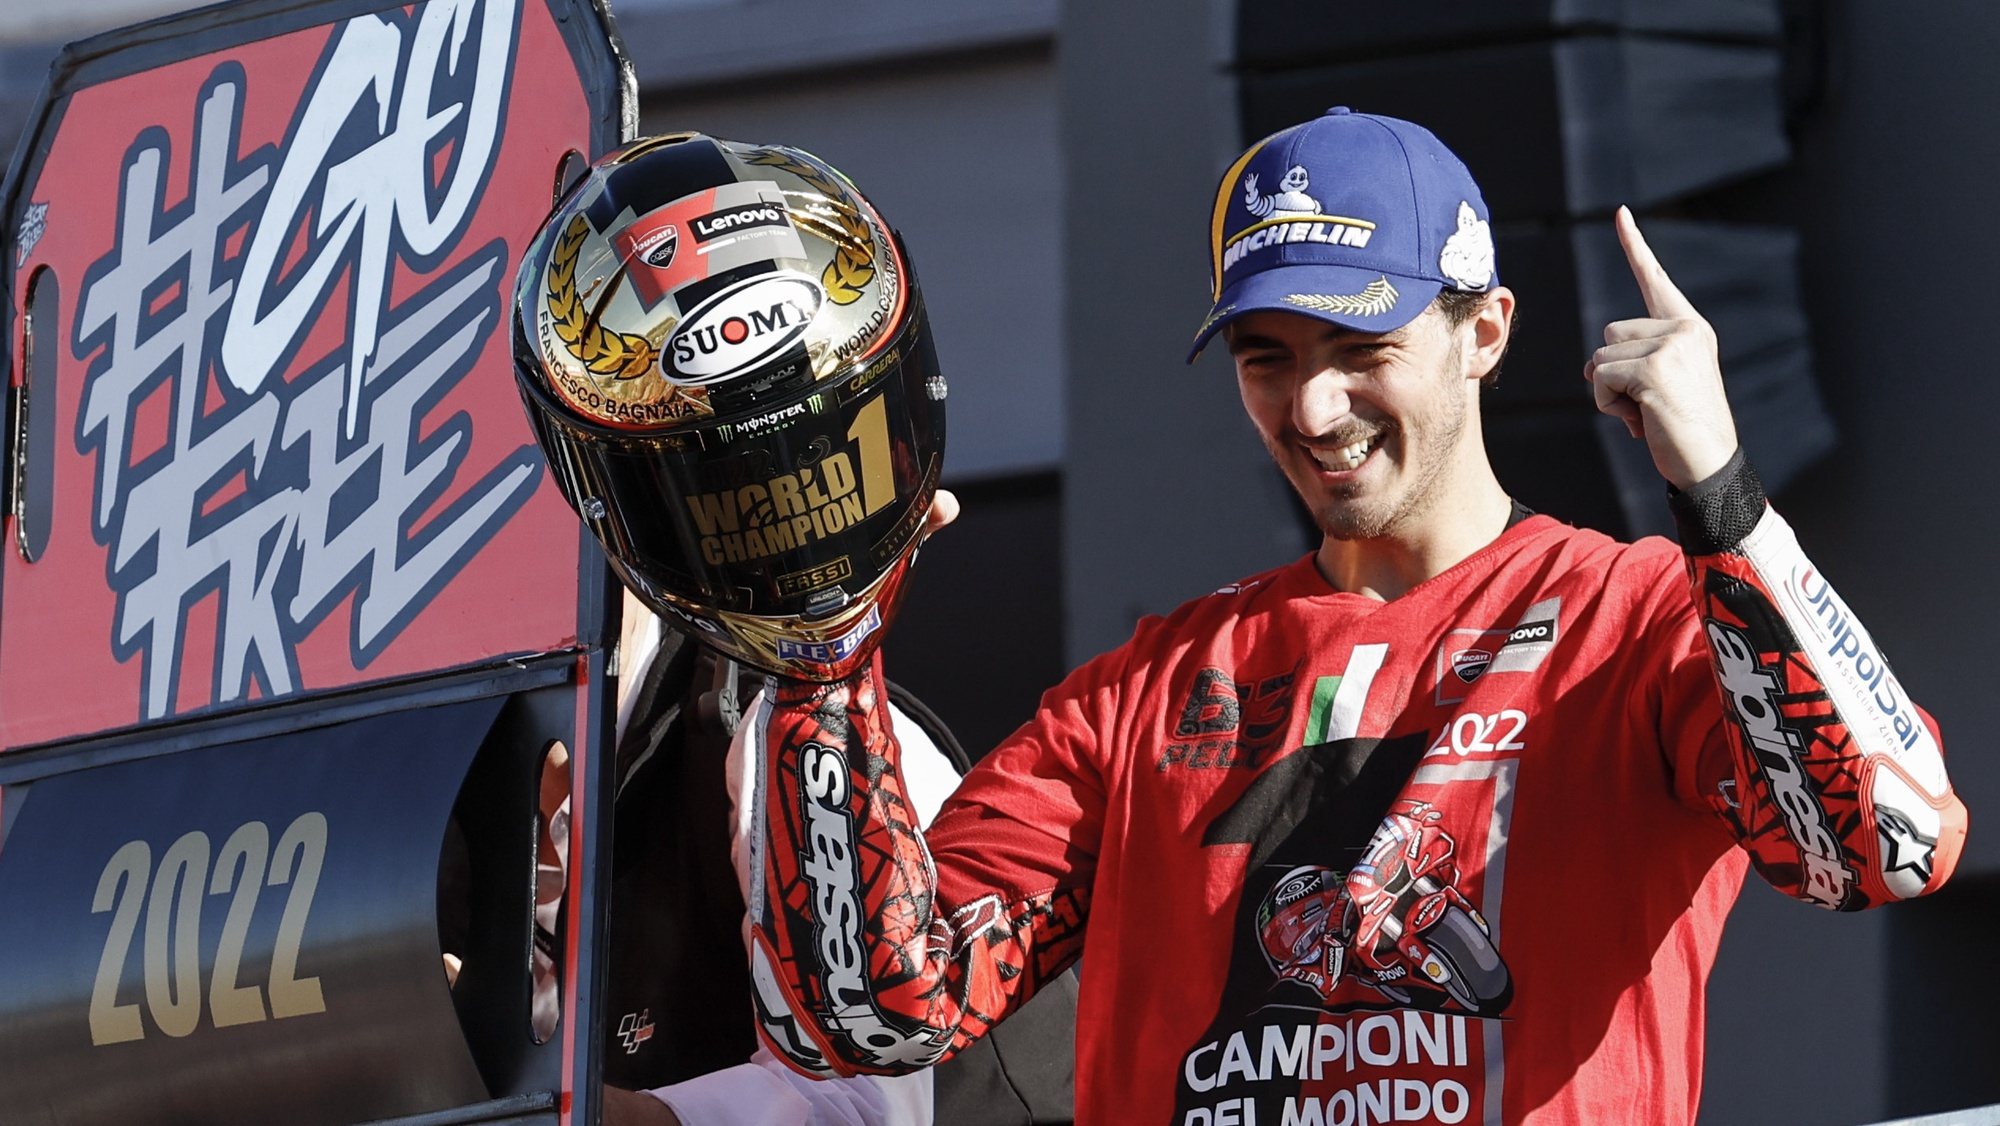 epa10290310 Moto GP rider Francesco Bagnaia celebrates on the podium after becoming world champion of his category at the race held at Ricardo Tormo Circuit in Cheste, Valencia, 06 November 2022, during Comunidad Valenciana Motorciclyng Grand Prix, the last Grand Prix of the season.  EPA/Biel Alino